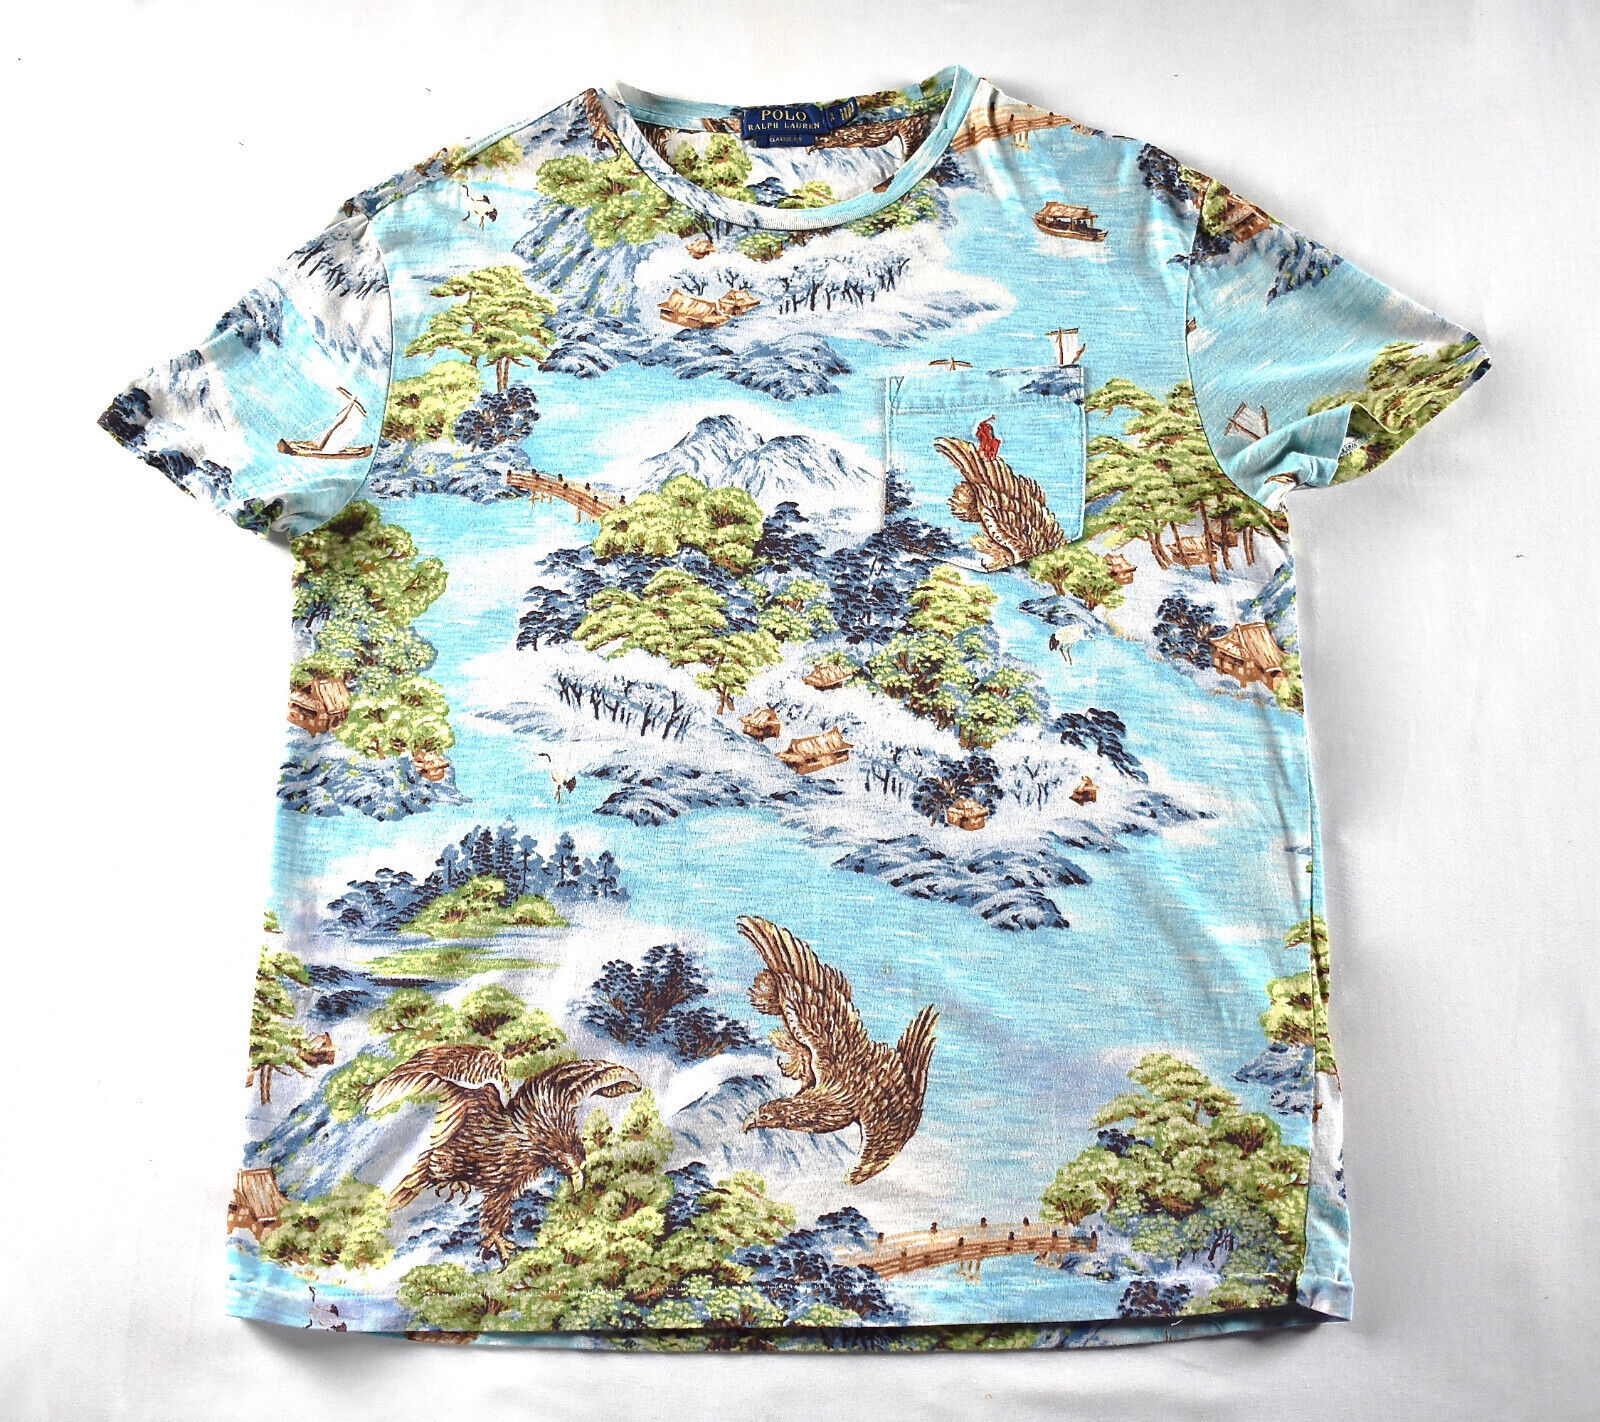 Primary image for Polo Ralph Lauren Hawaiian Pocket Tee Shirt Classic Fit Size Small